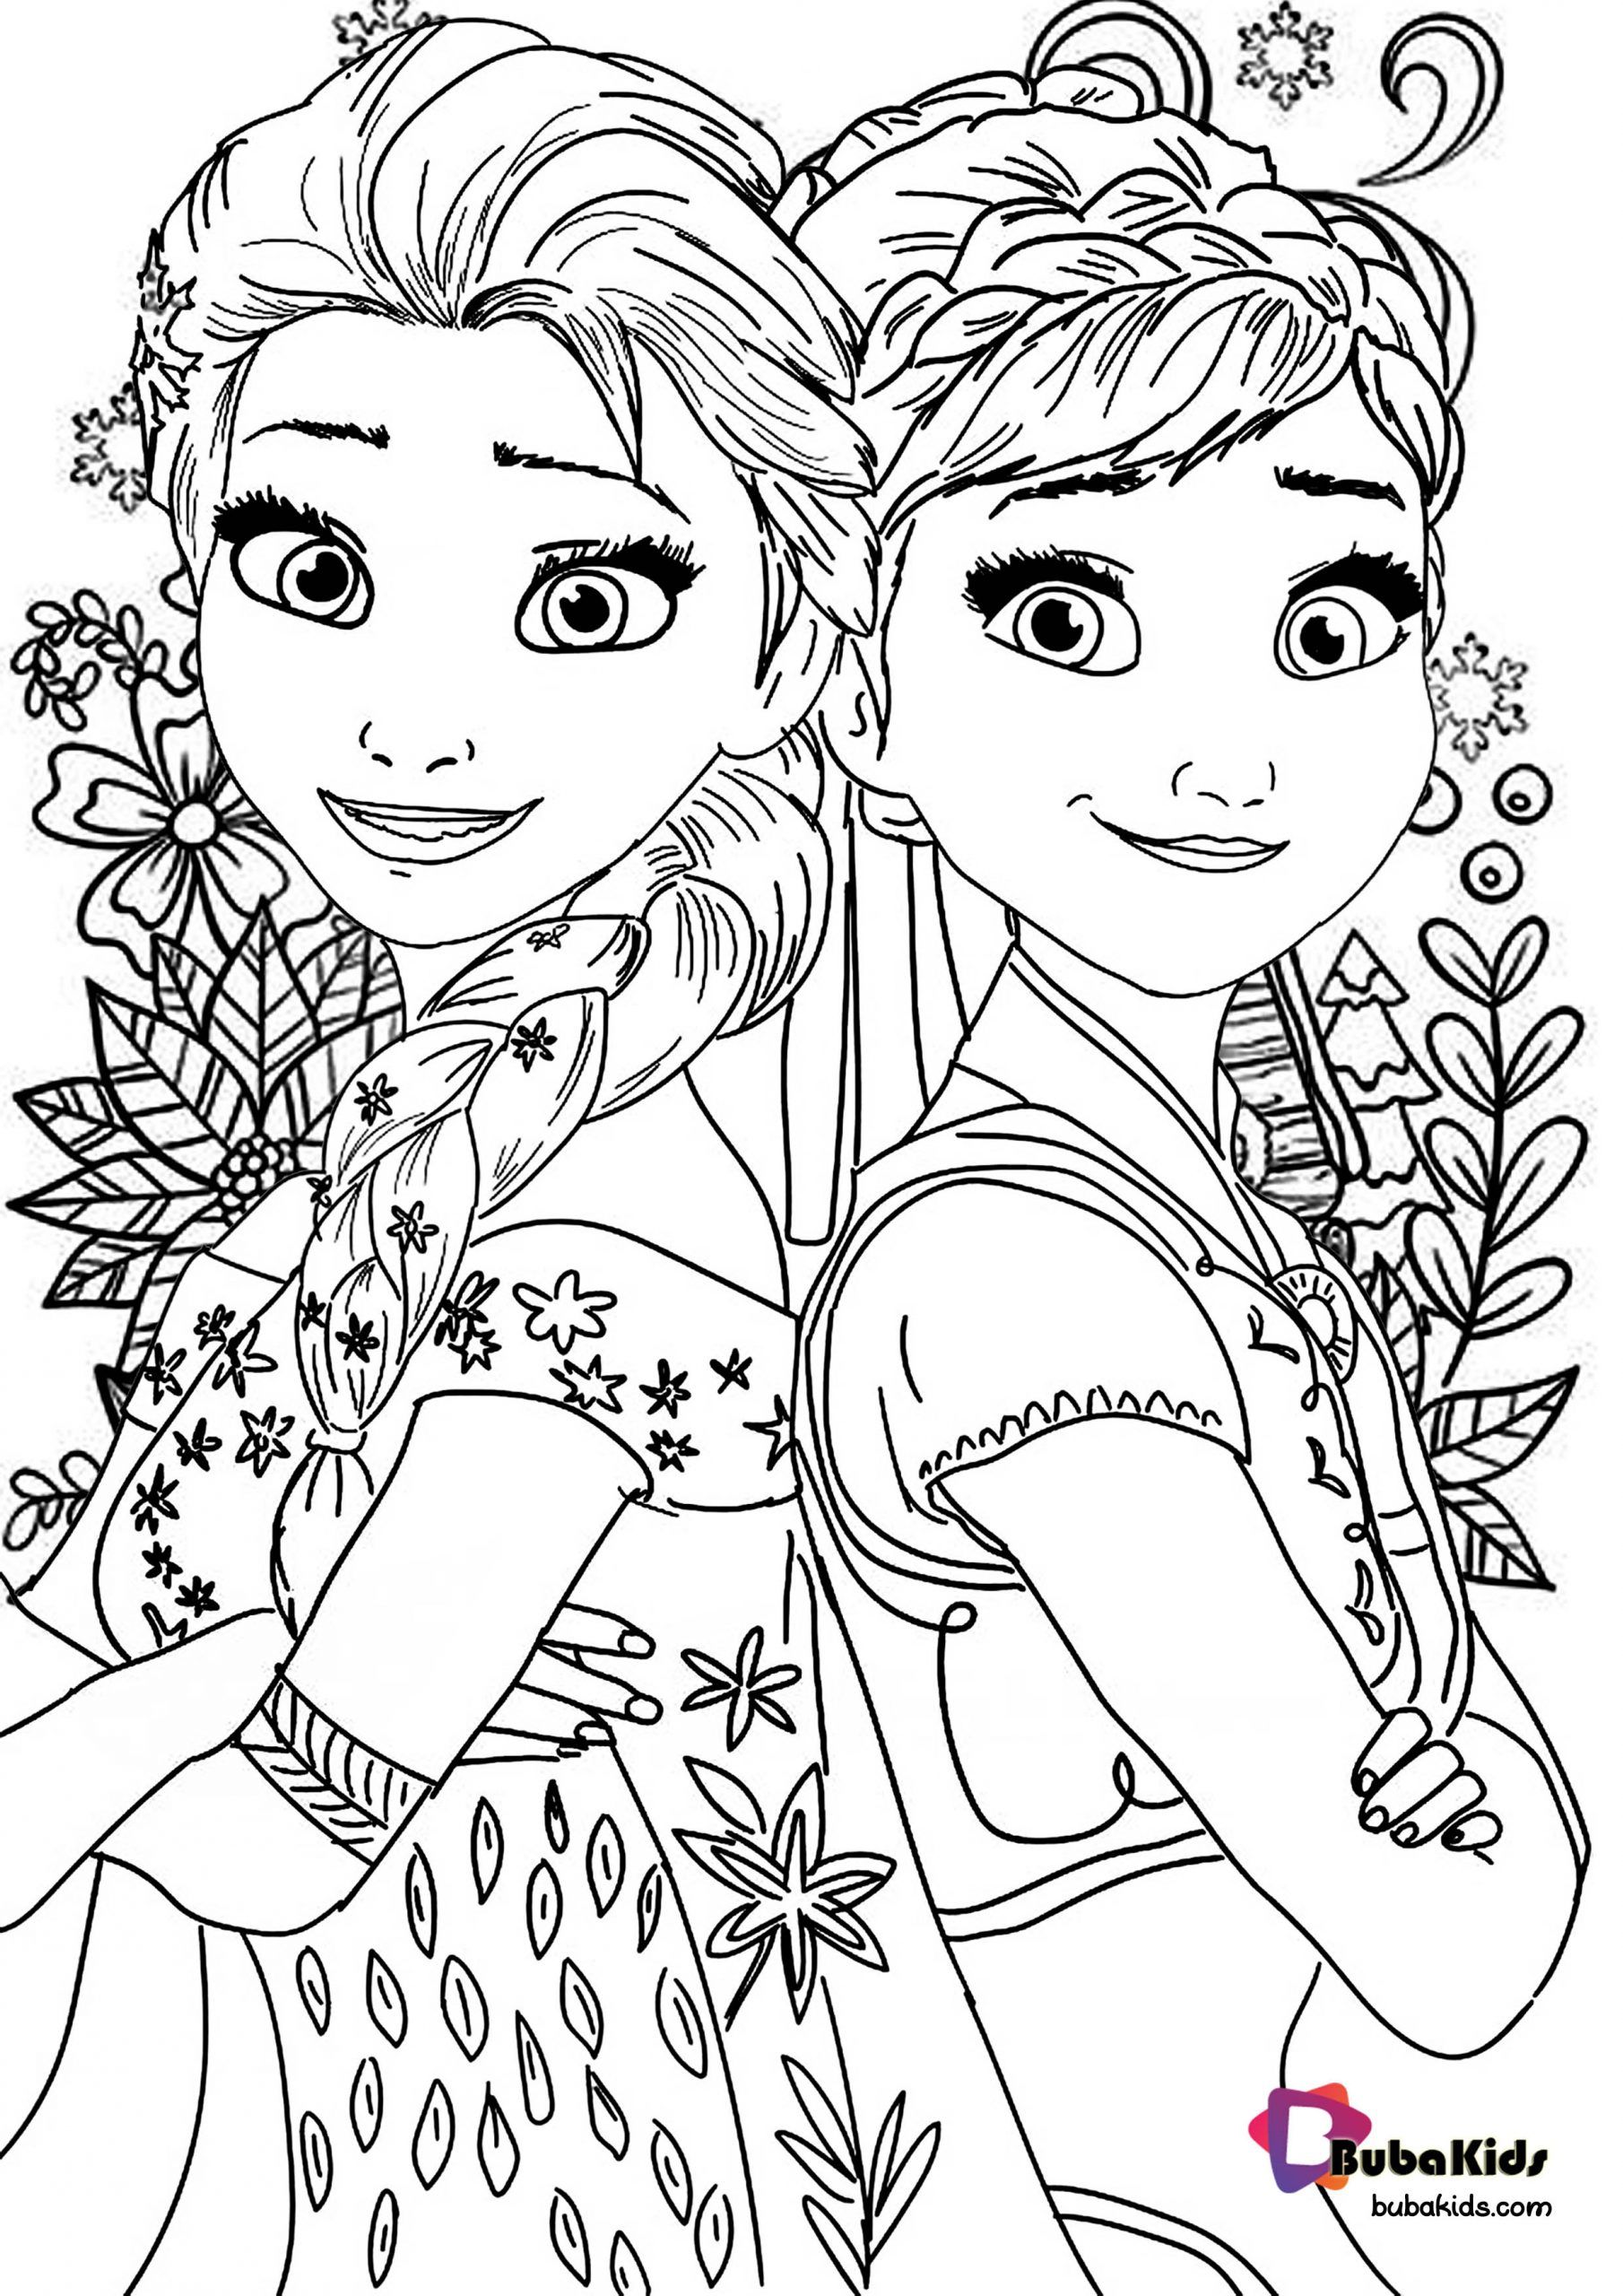 Frozen coloring page for kids collection of cartoon coloring pages for teenage printable that yoâ frozen coloring elsa coloring pages princess coloring pages